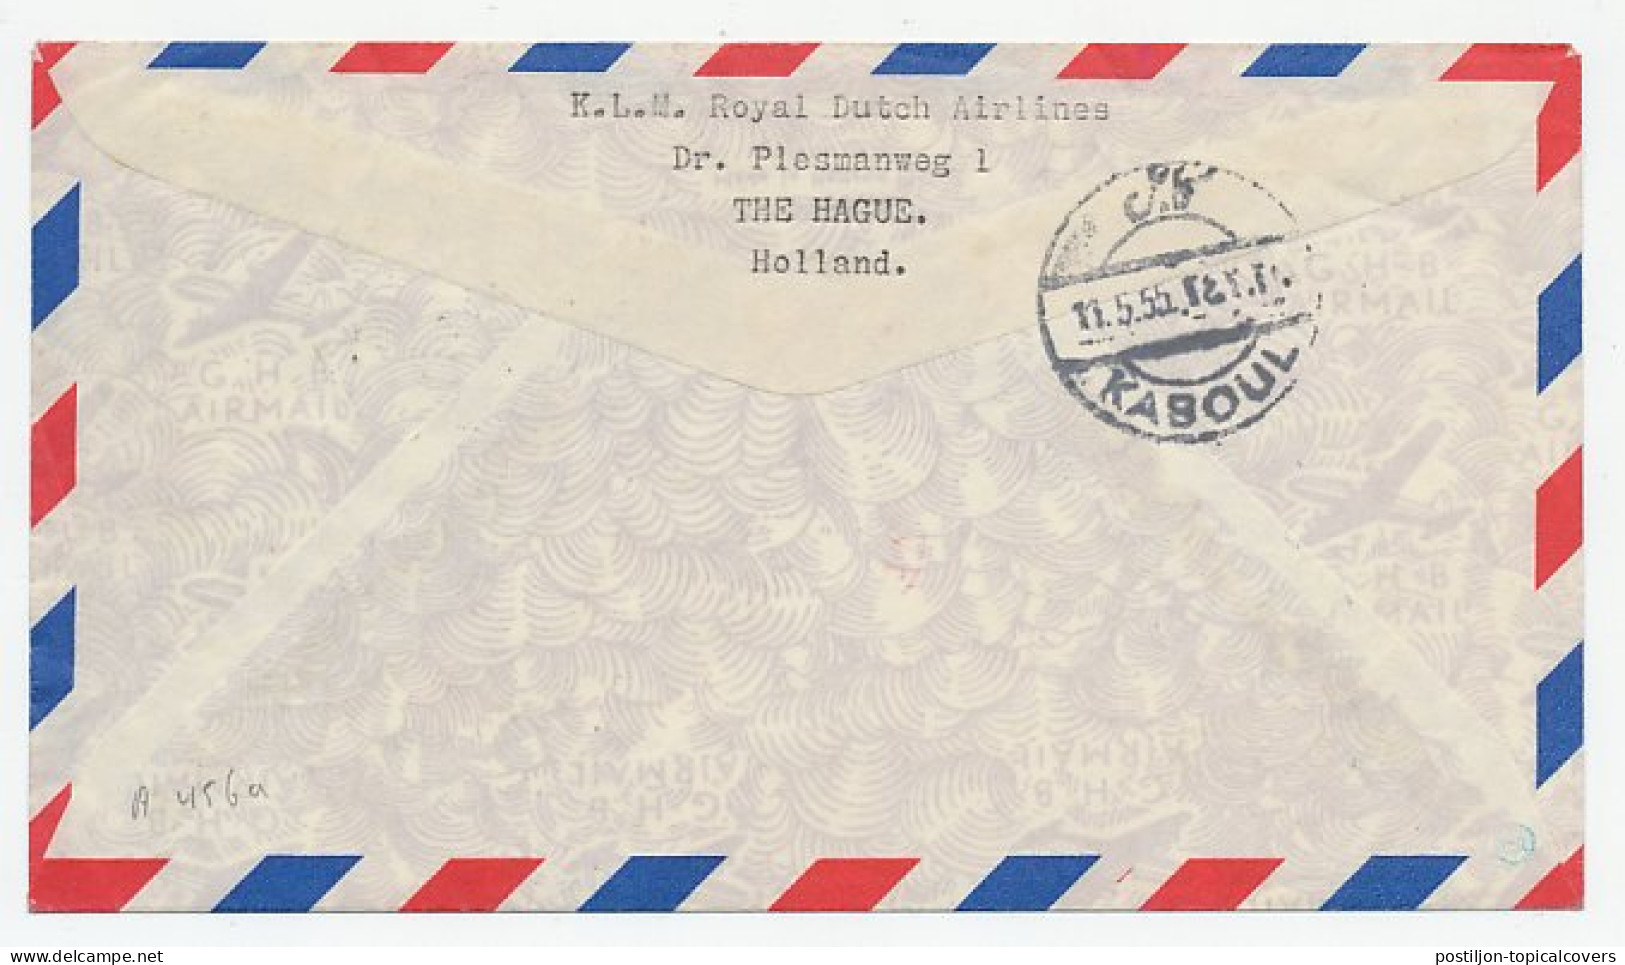 VH A 456 A Amsterdam - Kaboul Afghanistan 1955 - Unclassified